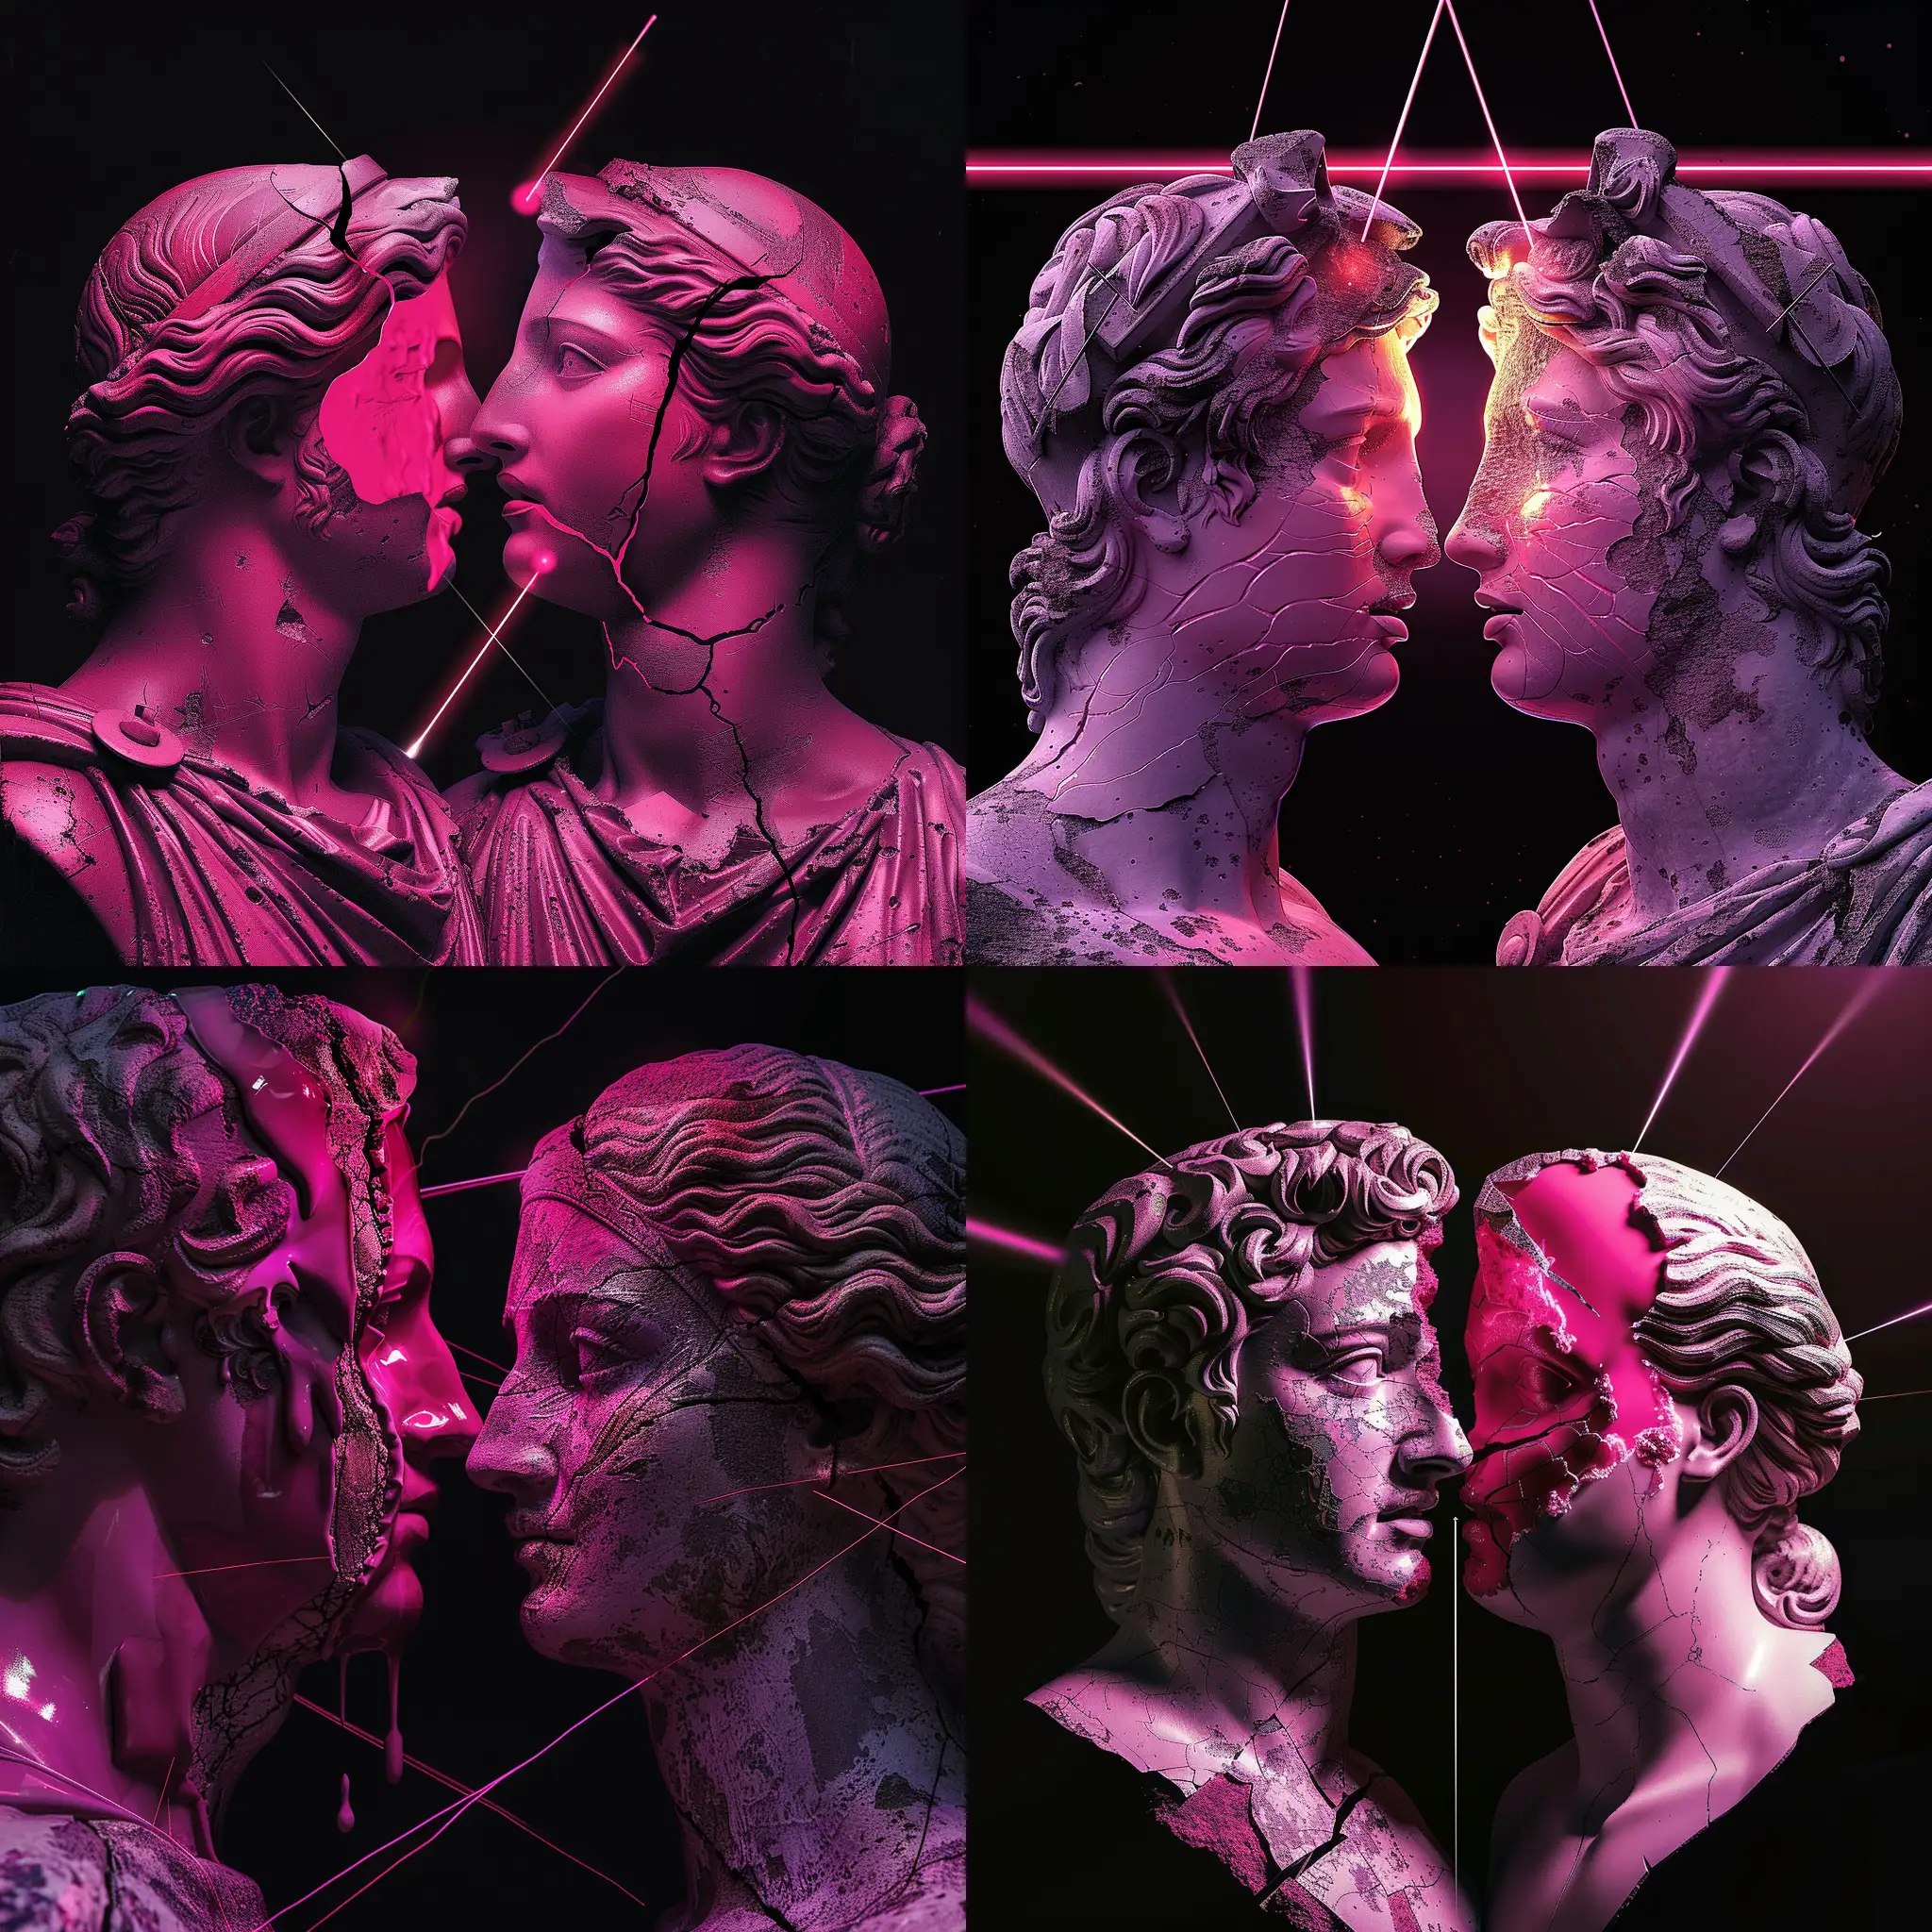  a romantic Greek statues face to face of a man and woman with magenta colour, dark background,melt parts on both face skin , fighting from laser lights behind and front of the heads , black background,hd, ready for music cover